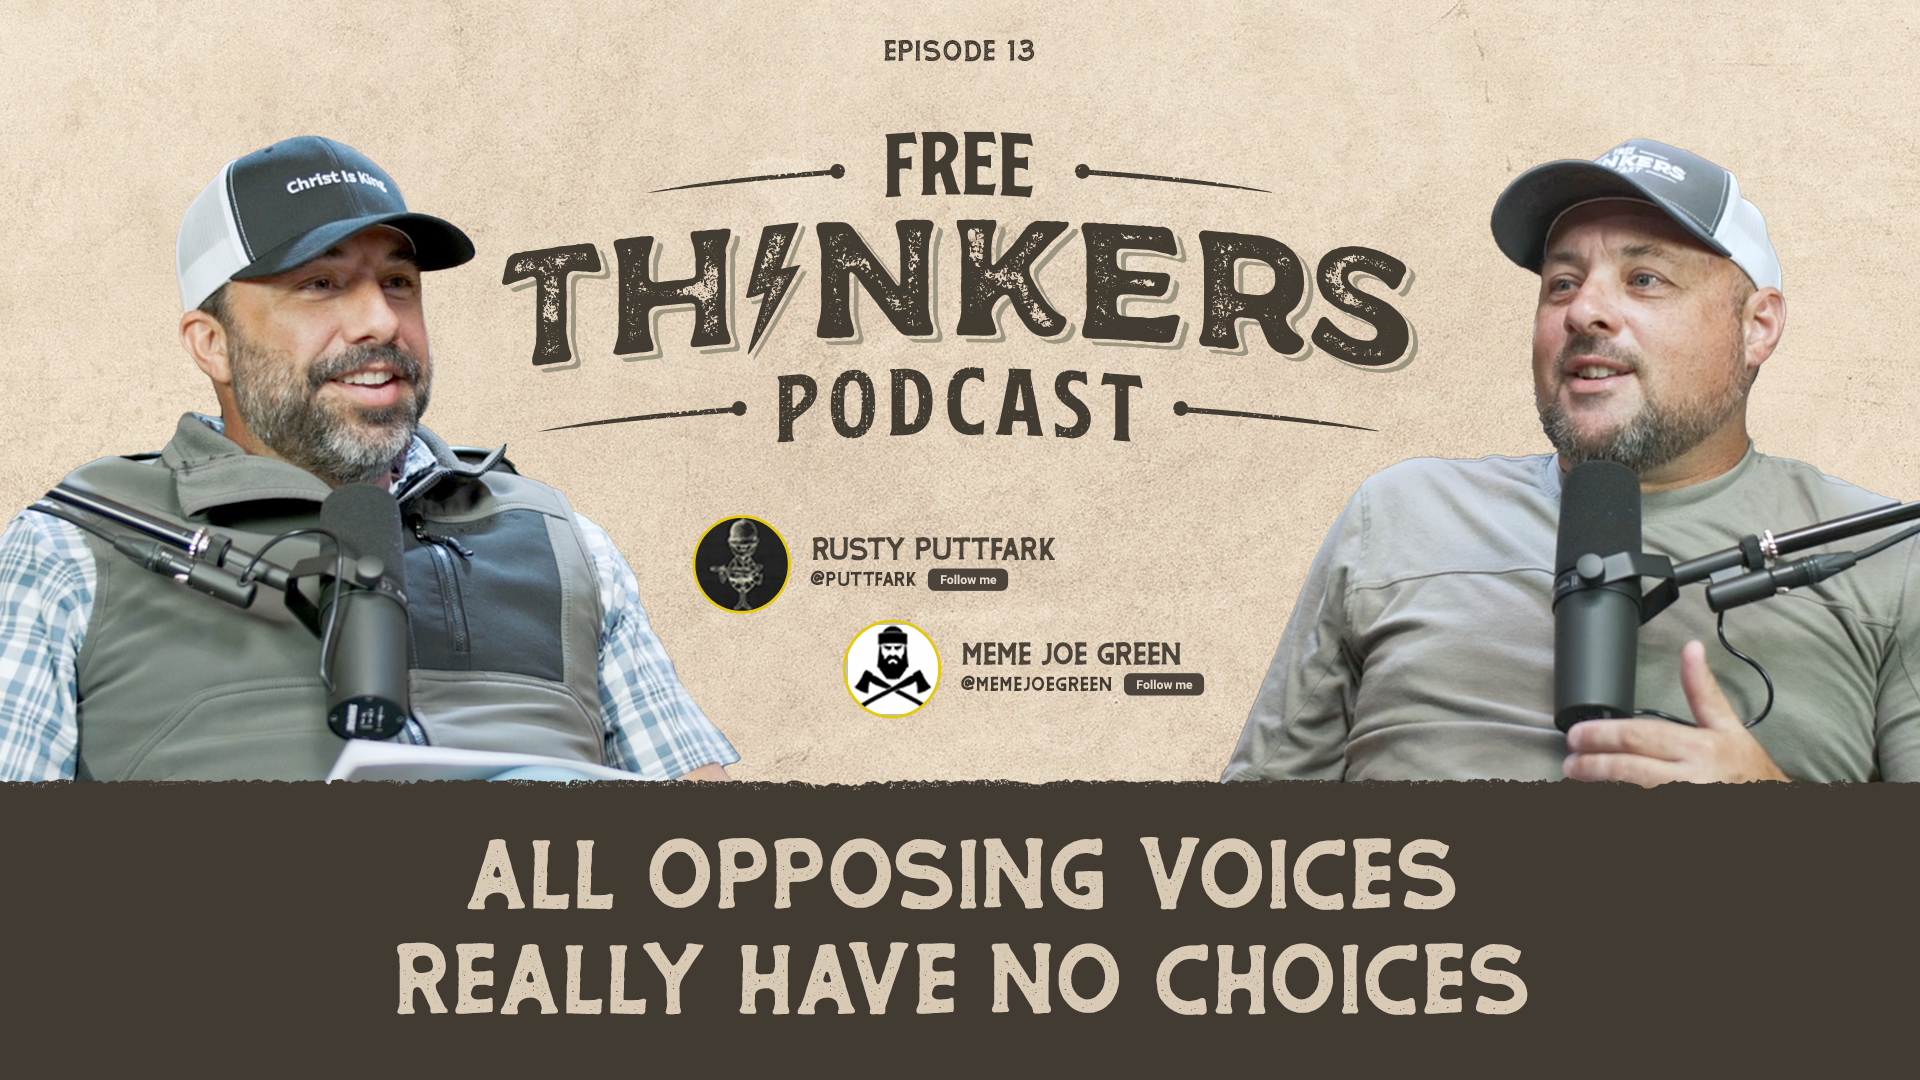 App Opposing Voices Really Have No Choices Podcast Thumbnail